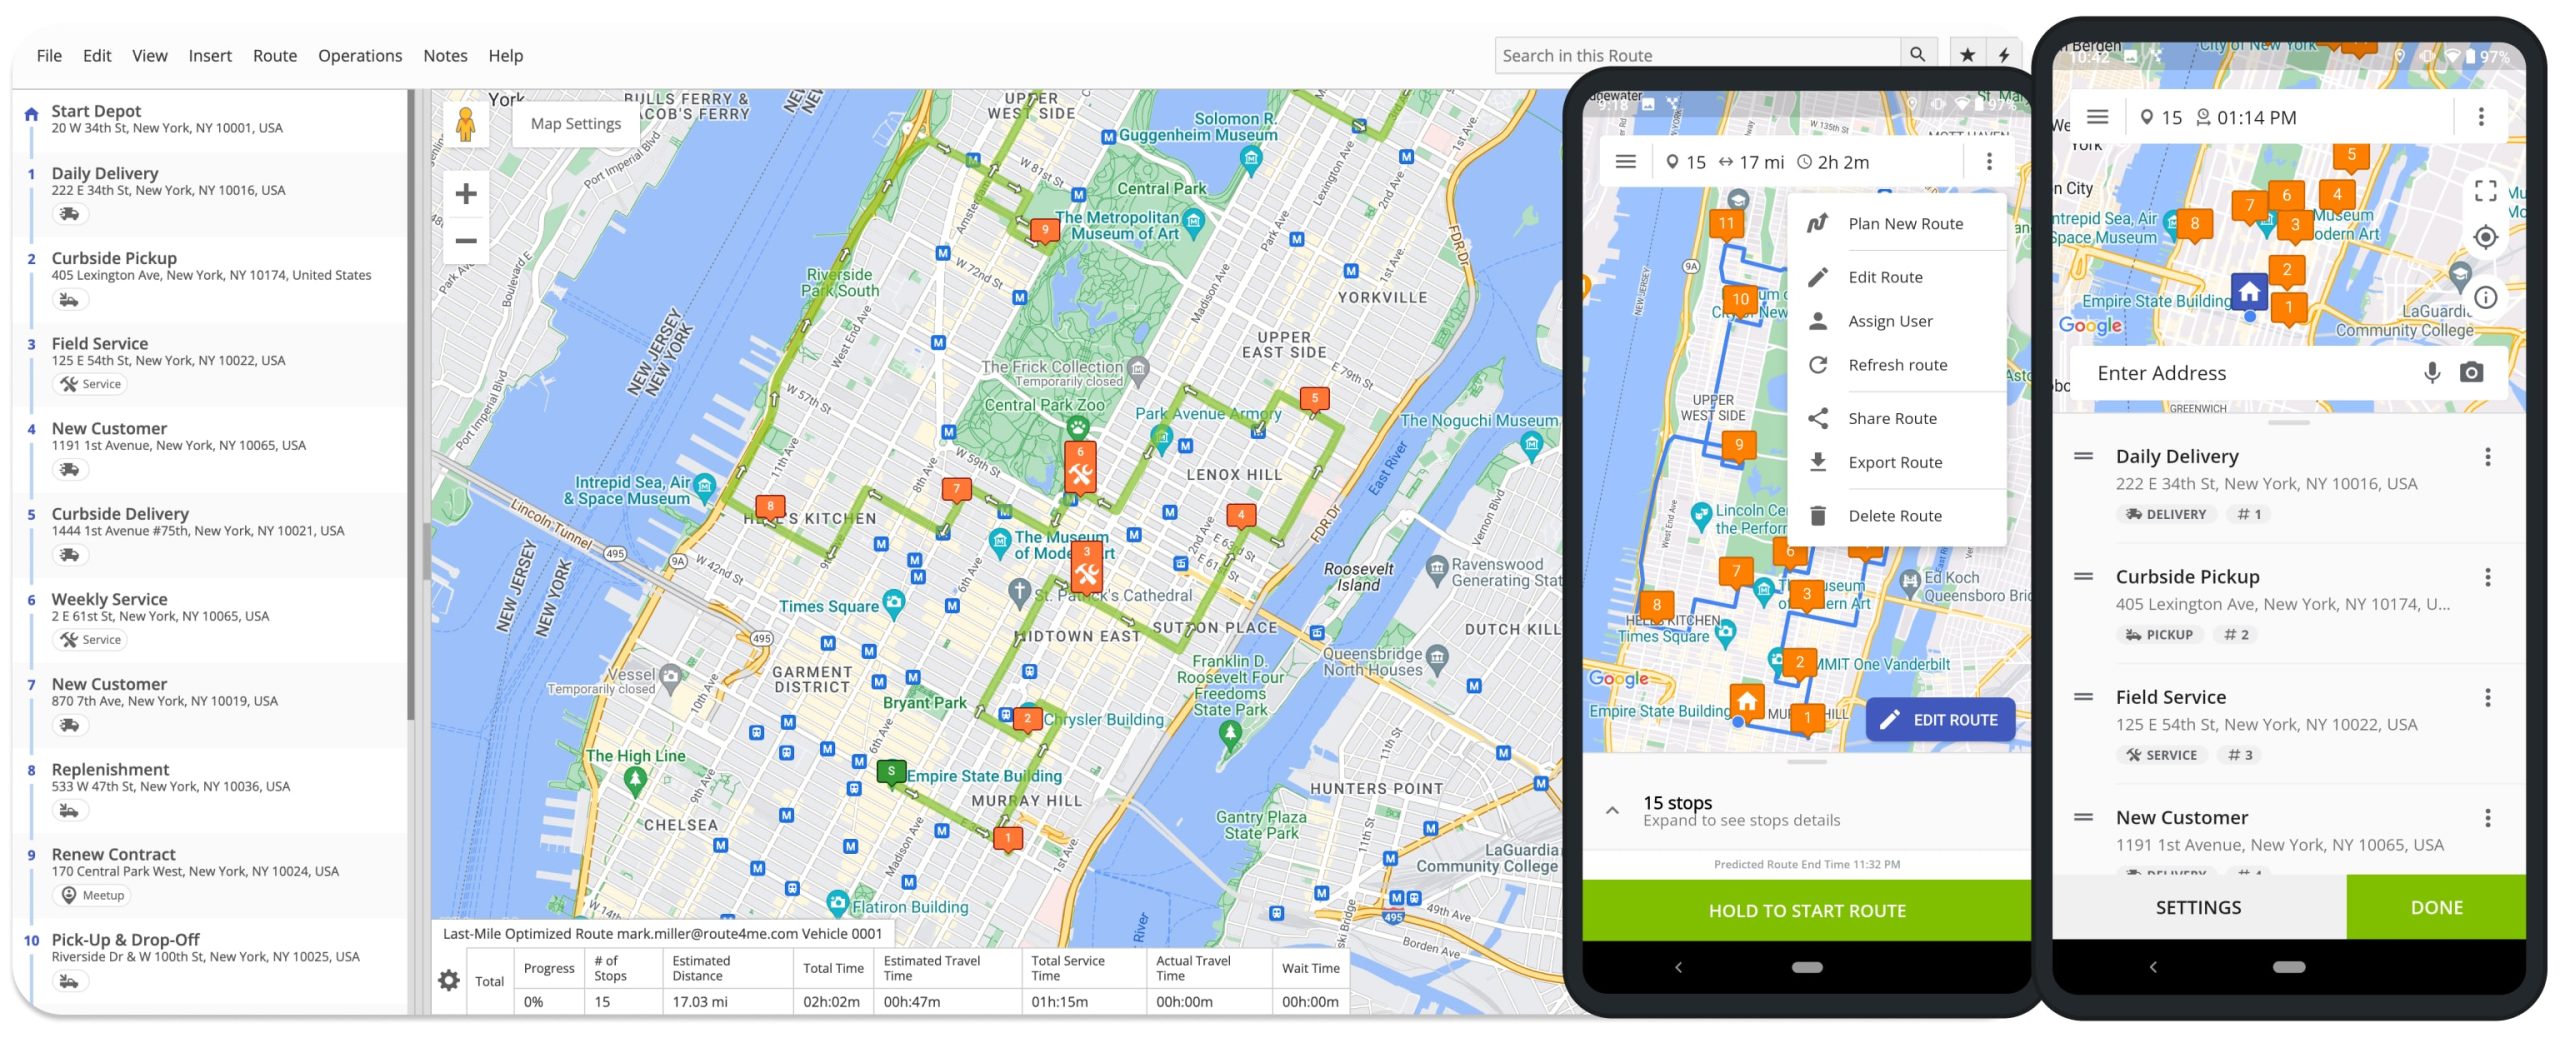 Synchronize route changes and updates in real-time between Route4Me's Mobile App for drivers and Web Platform for route planners, dispatchers, and managers.